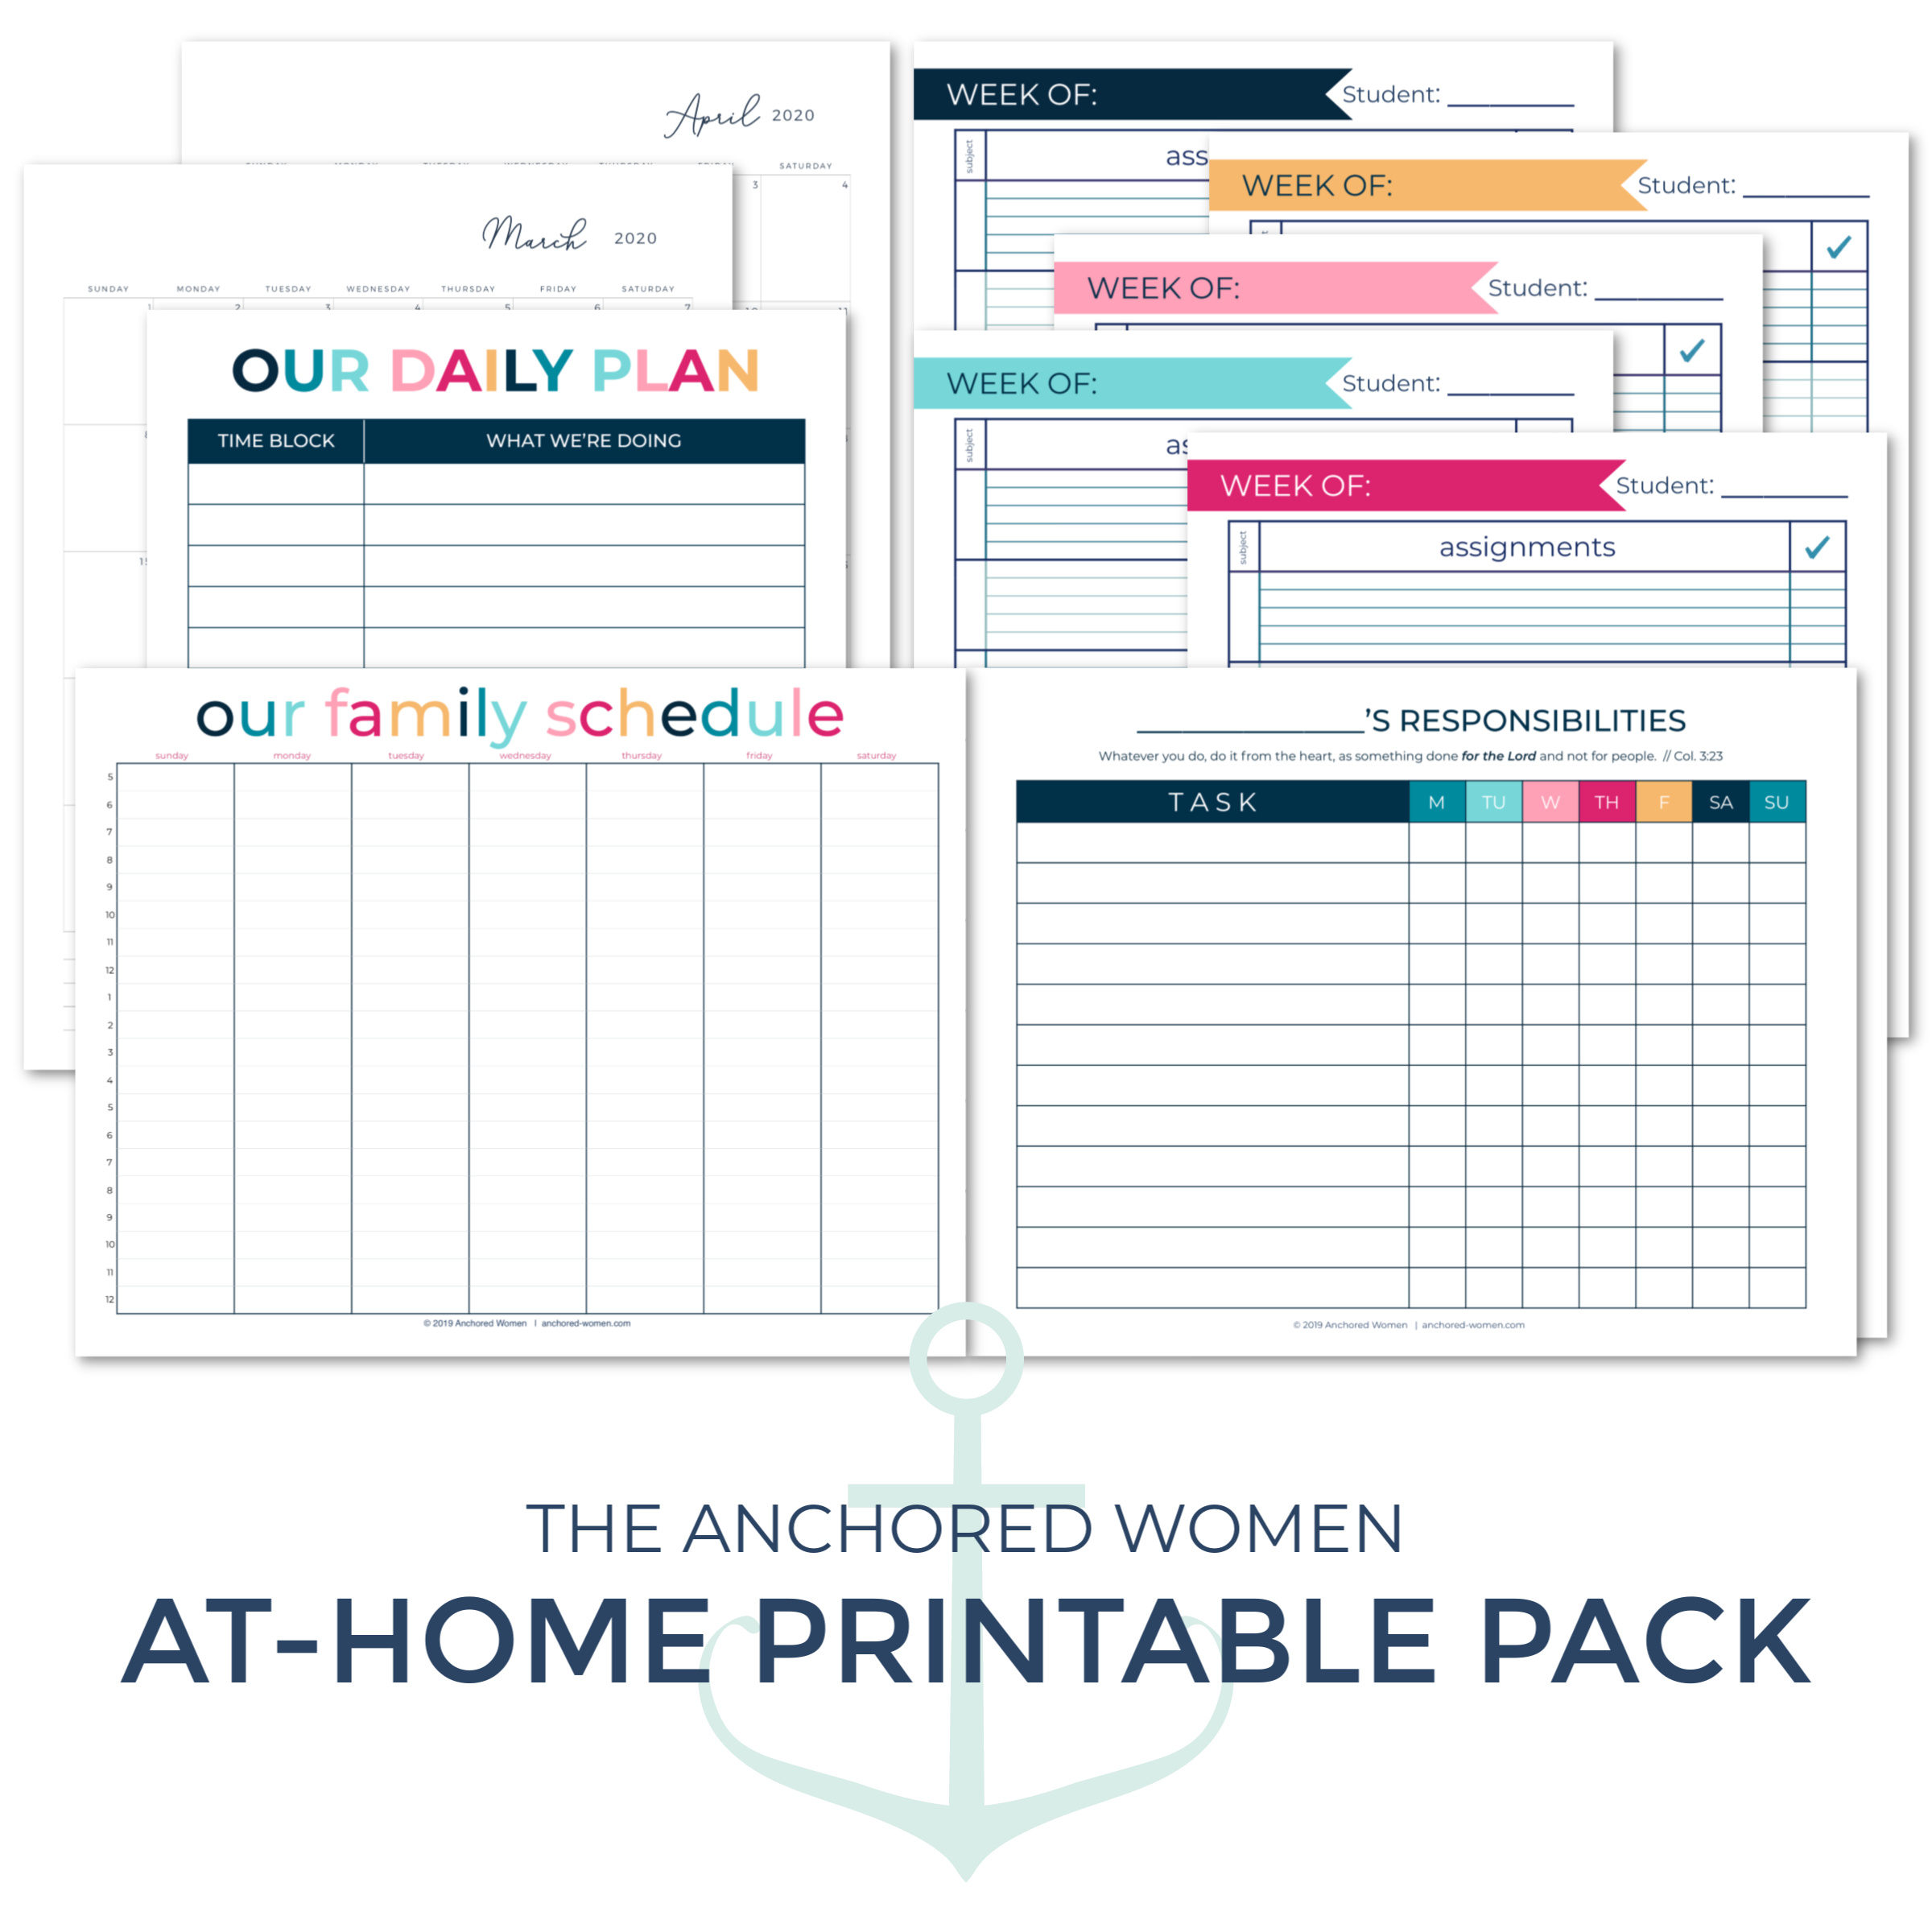 Download your free At-Home Printable Pack!